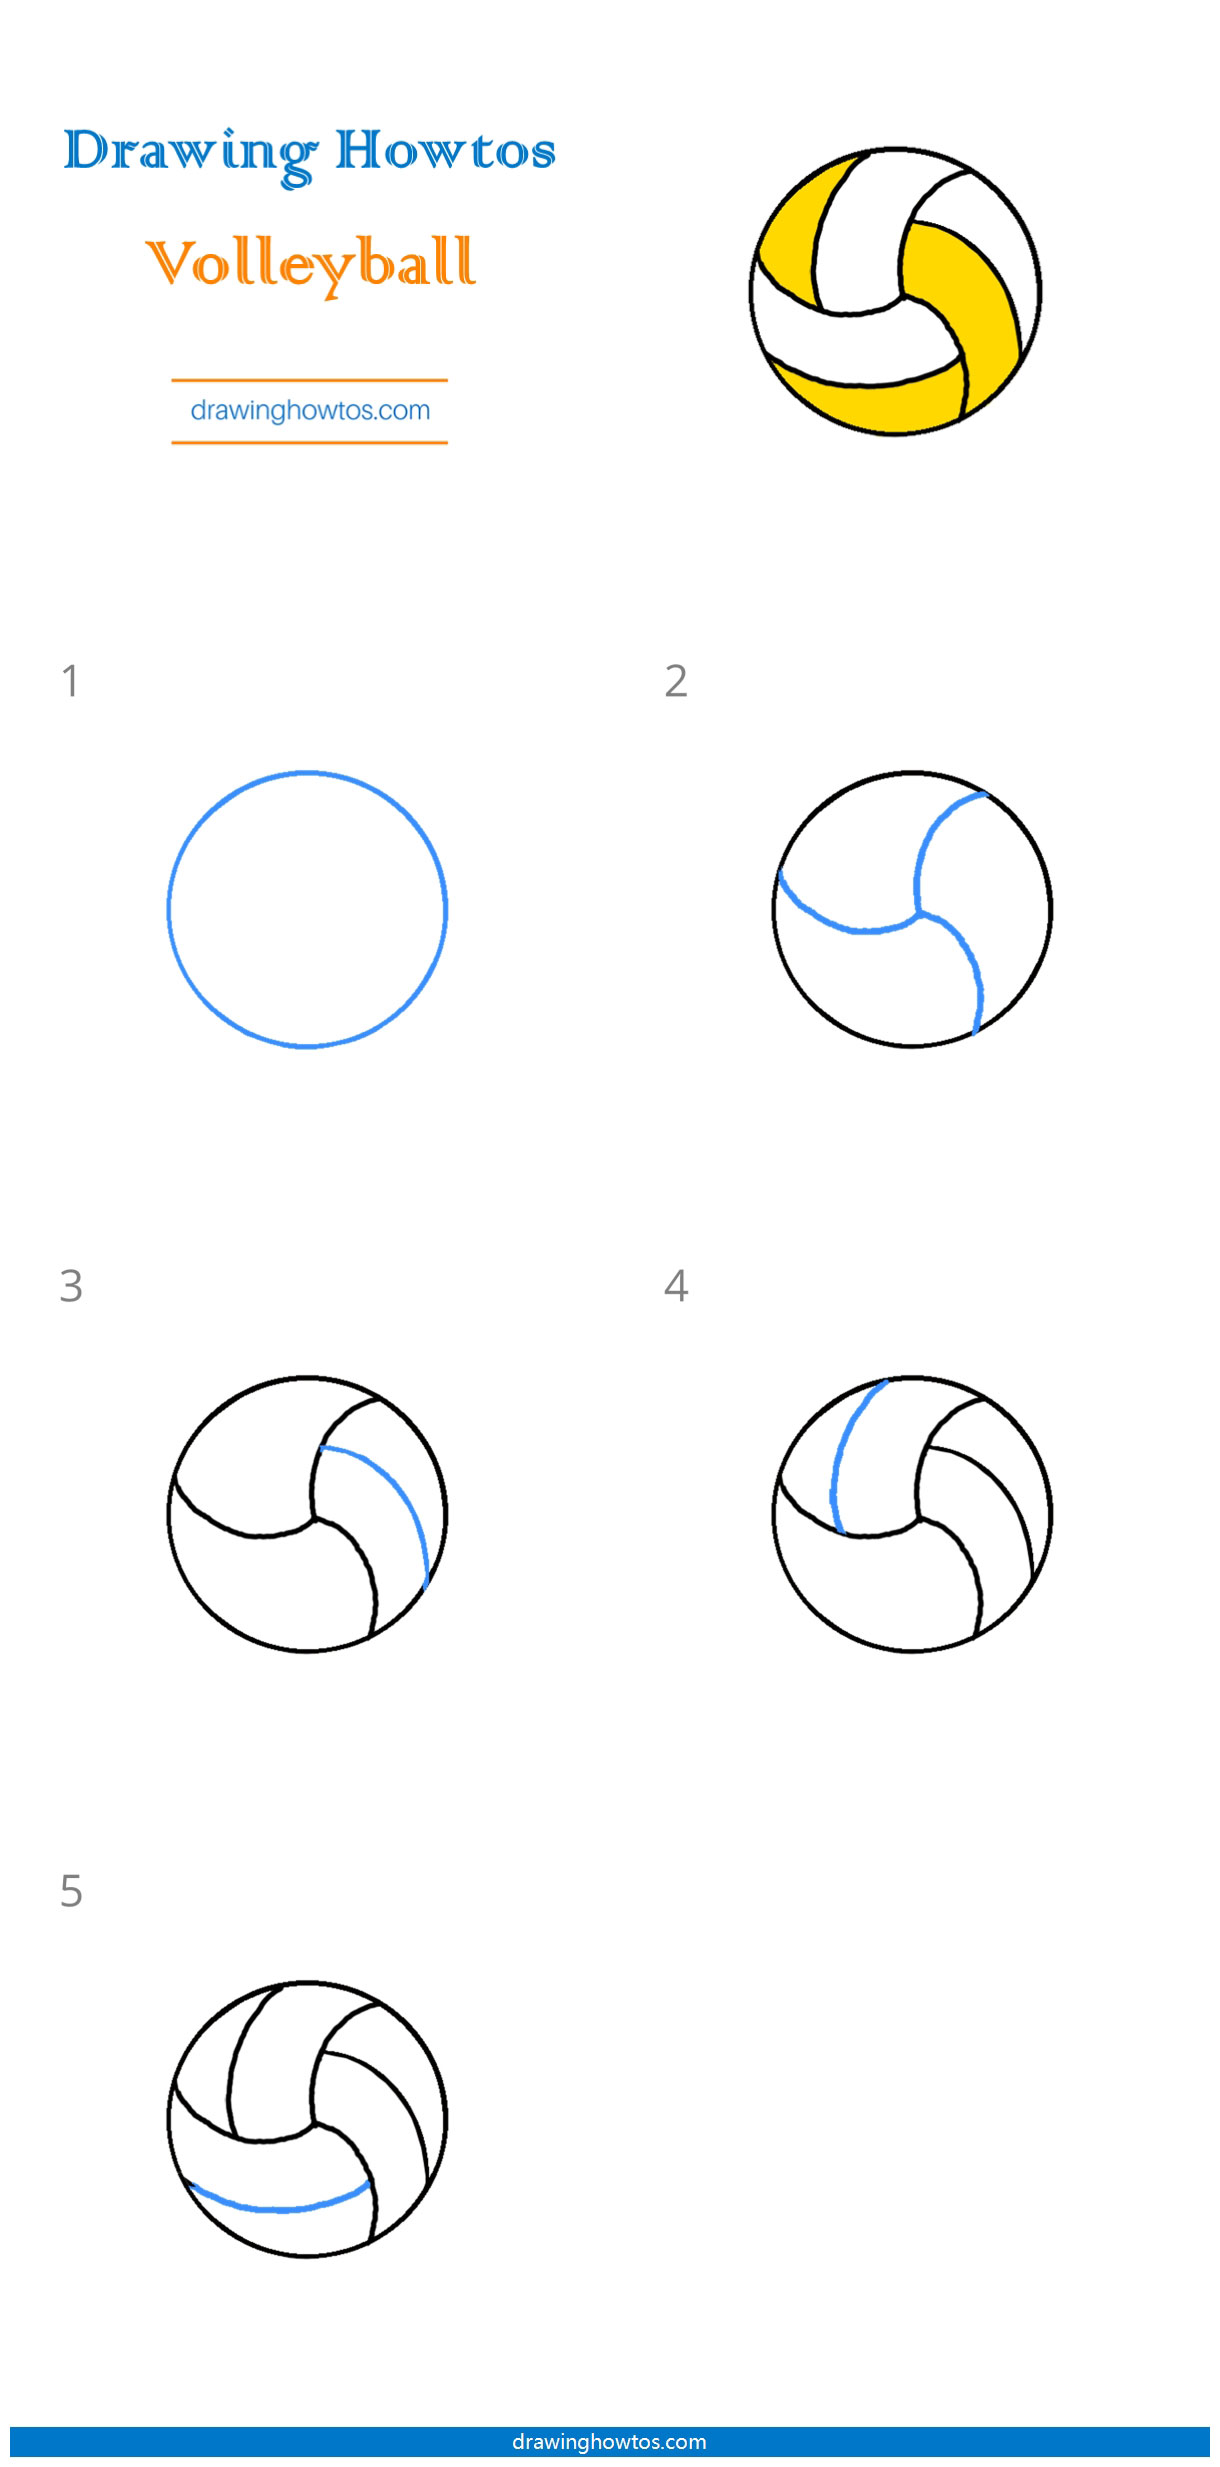 How to Draw a Volleyball Step by Step